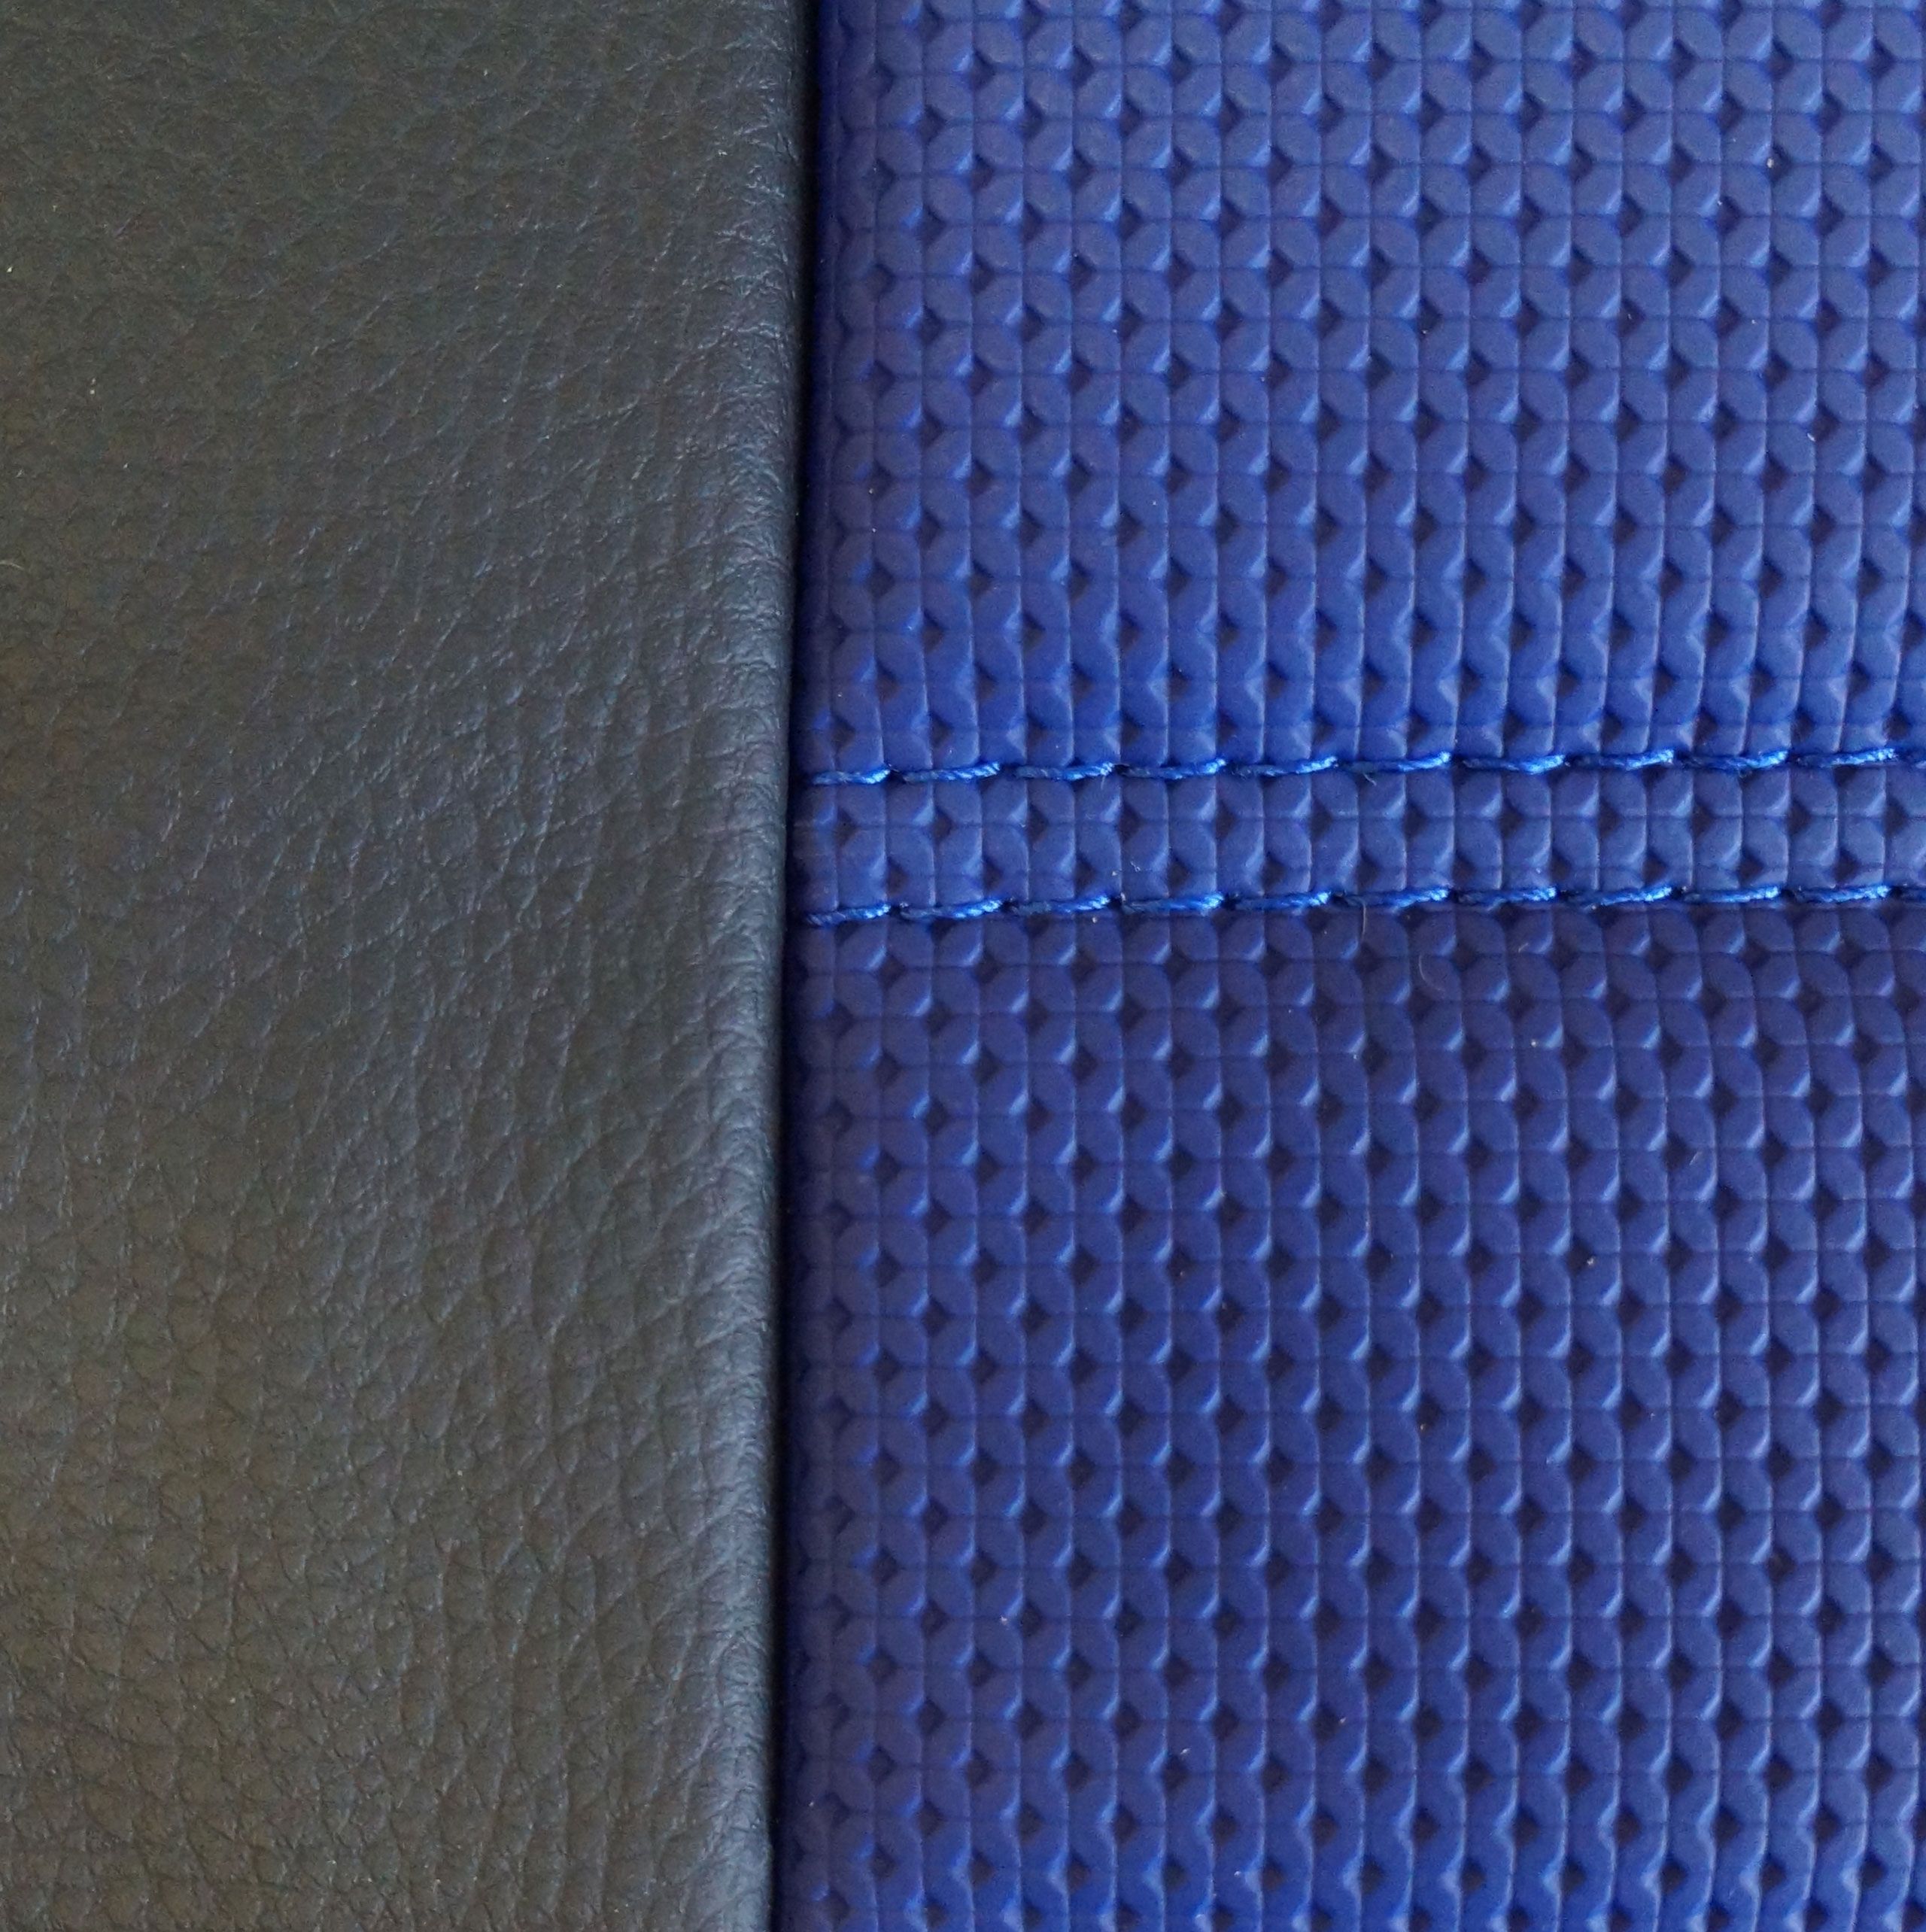 Black and Blue with Blue Stitching Example